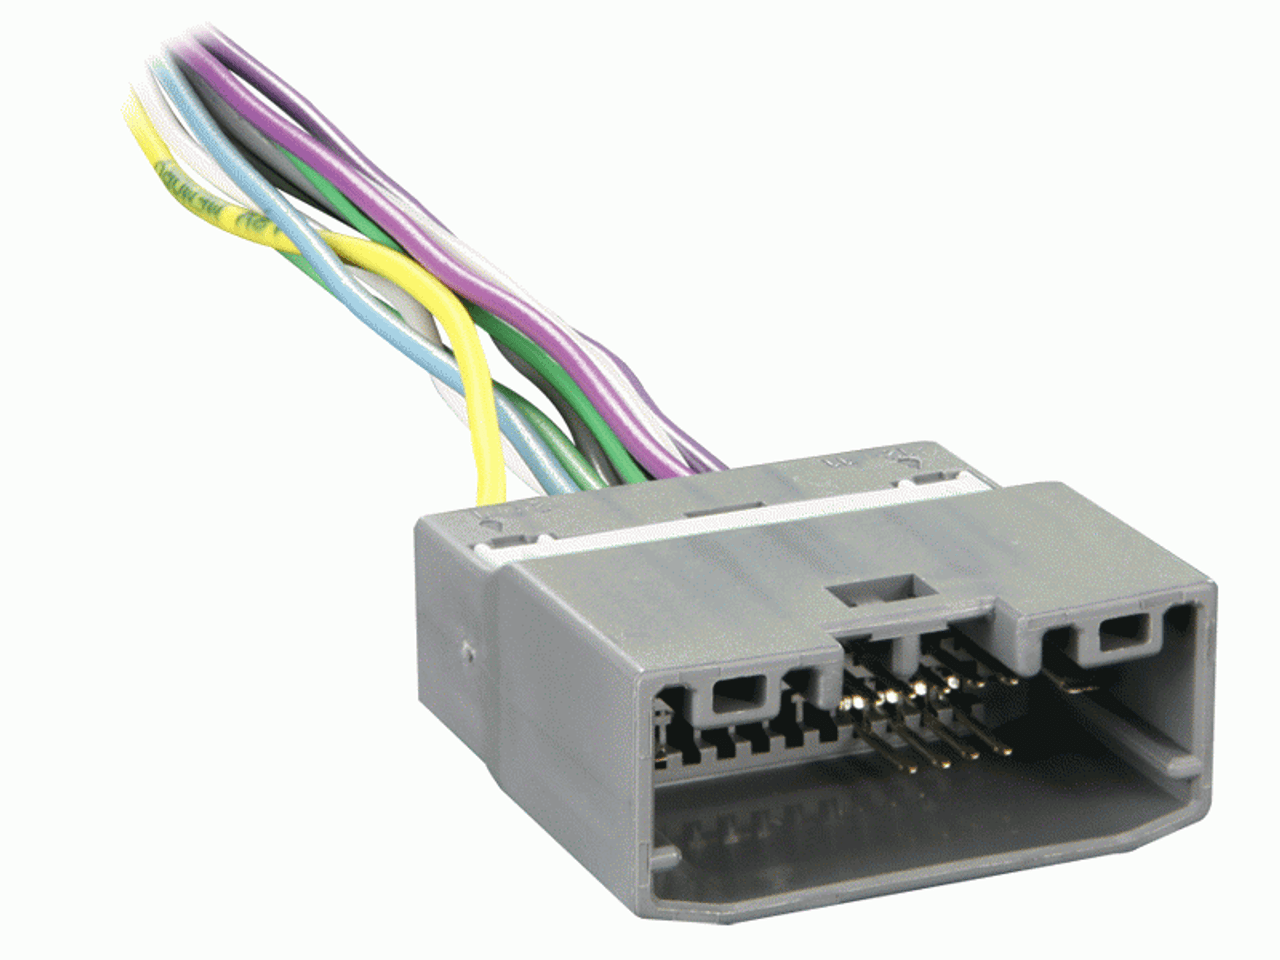 Metra 70-6522 Radio Wiring Harness for Chrysler, Dodge & Jeep Vehicles  2007-Up - Singh Electronics